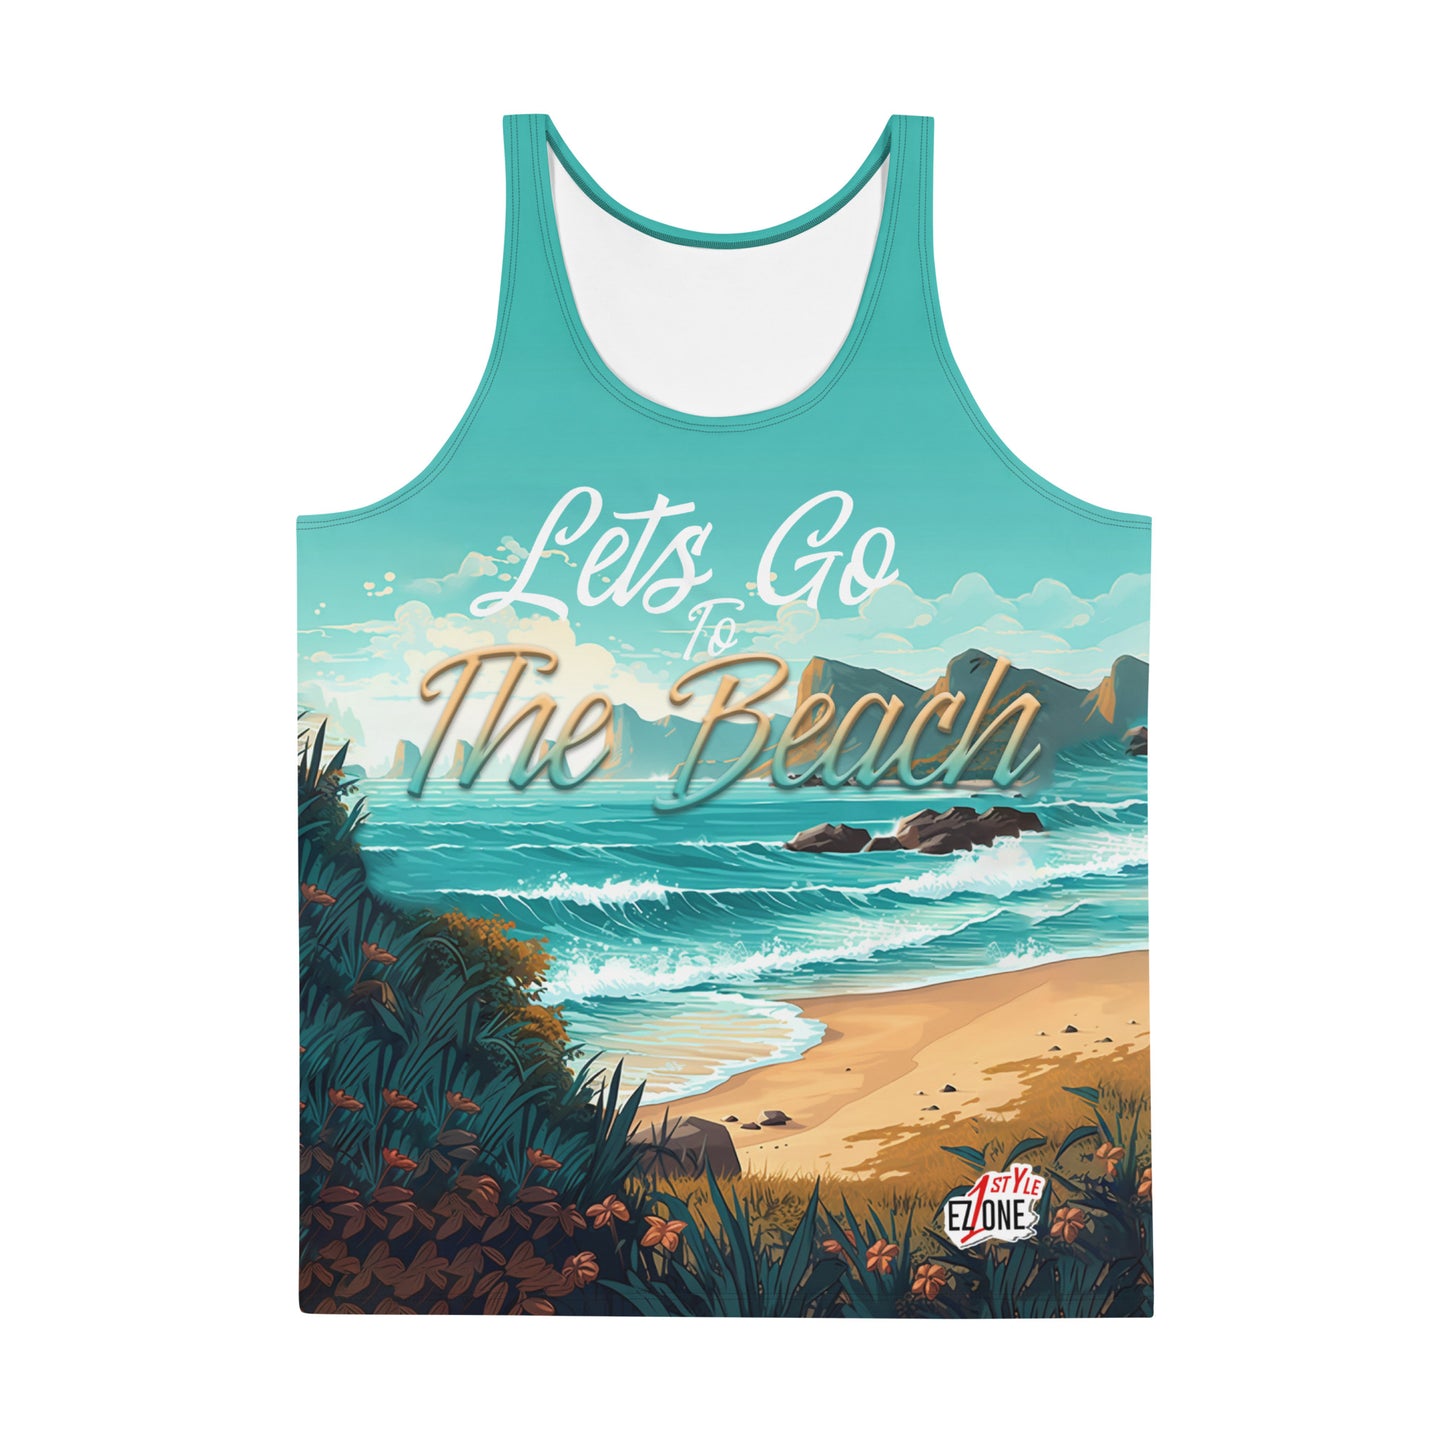 Lets Go To The Beach - Unisex Tank Top